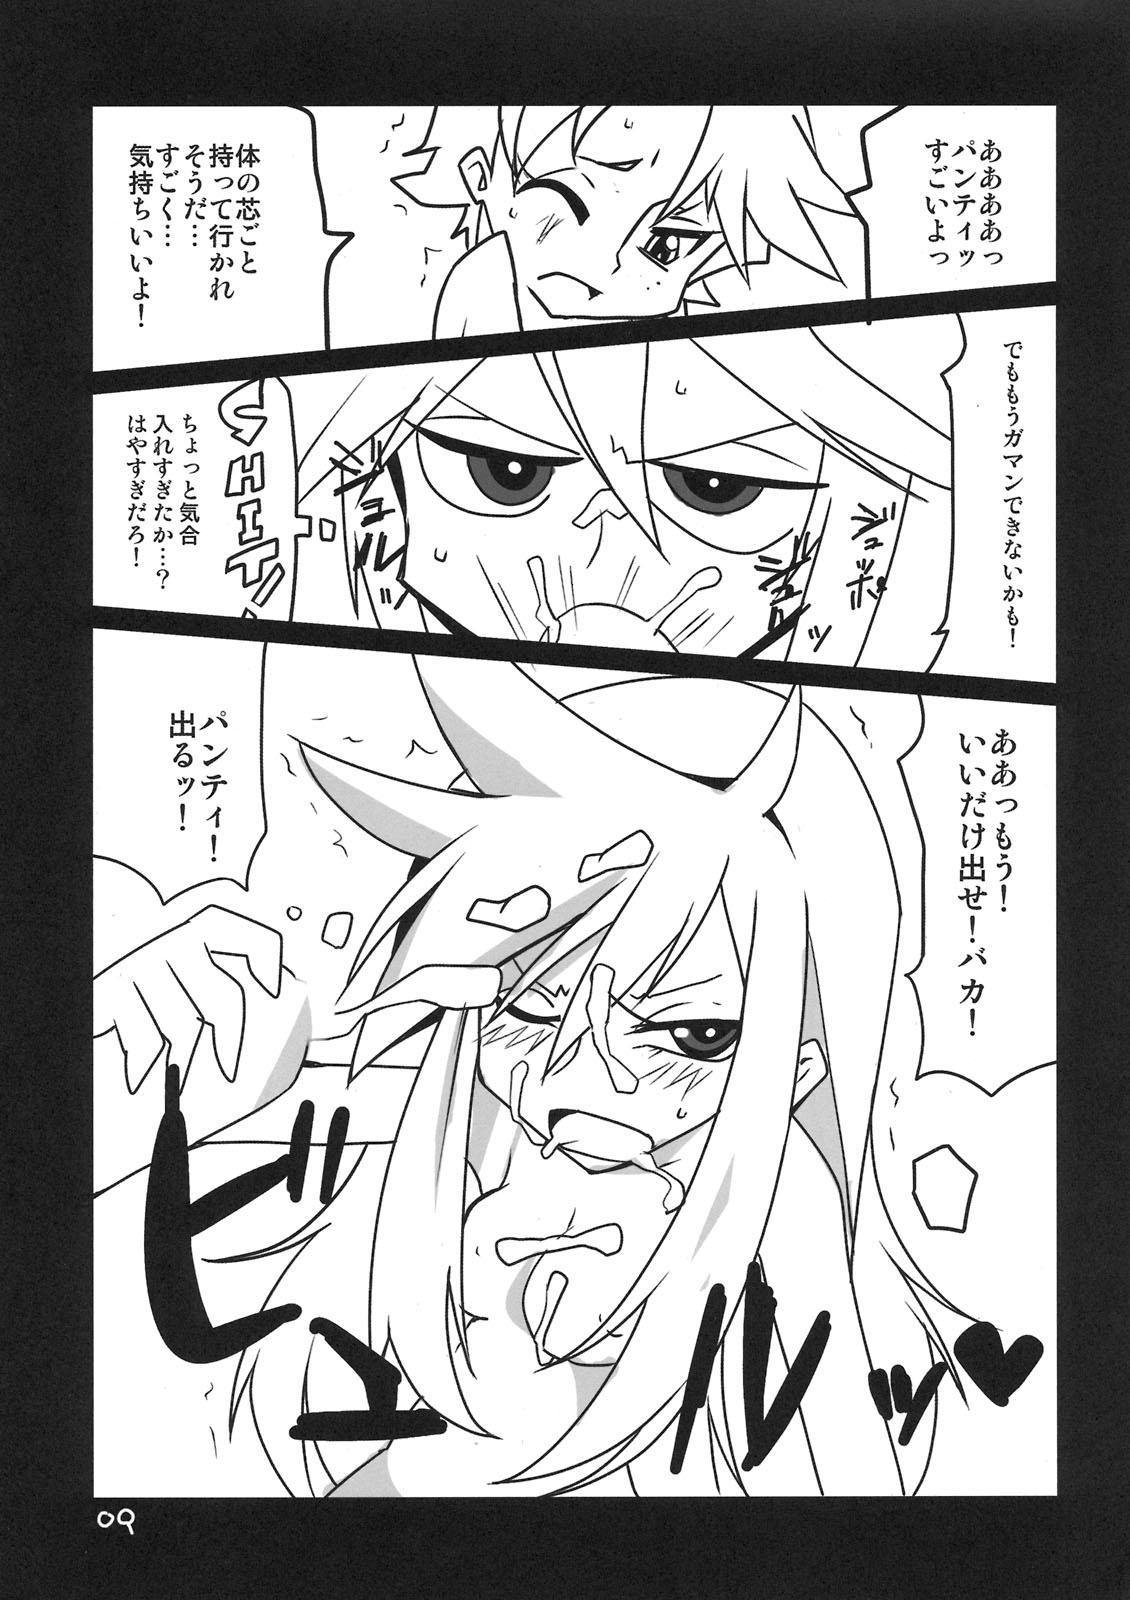 Tattooed Panty & Stocking Portable - Panty and stocking with garterbelt Handsome - Page 9